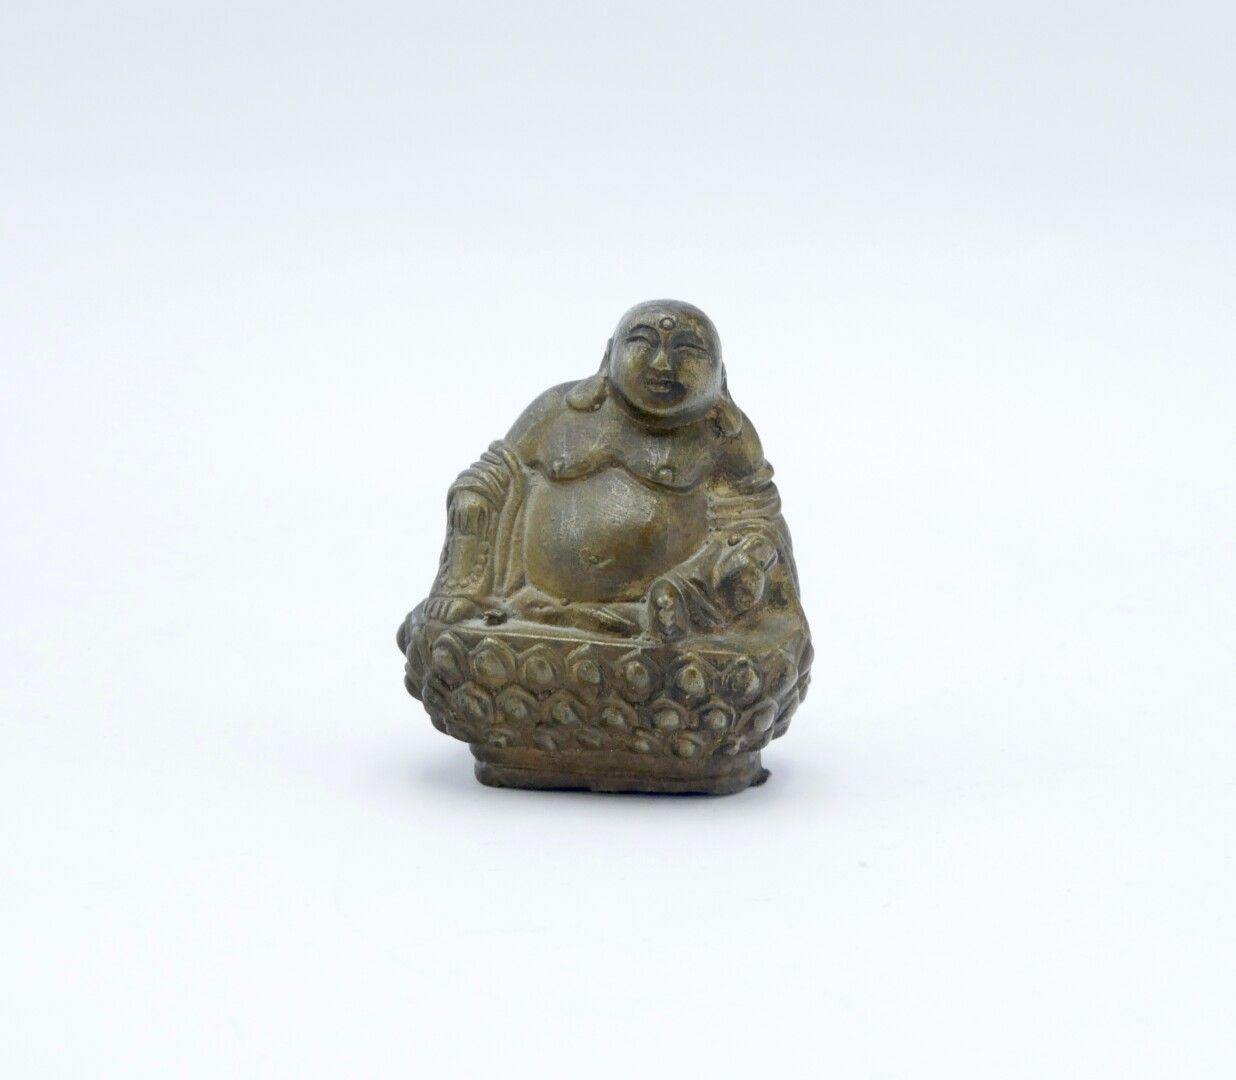 Null ASIA - Siglo XX 

Buda de bronce 

H. 9 cm. 3,5 in.